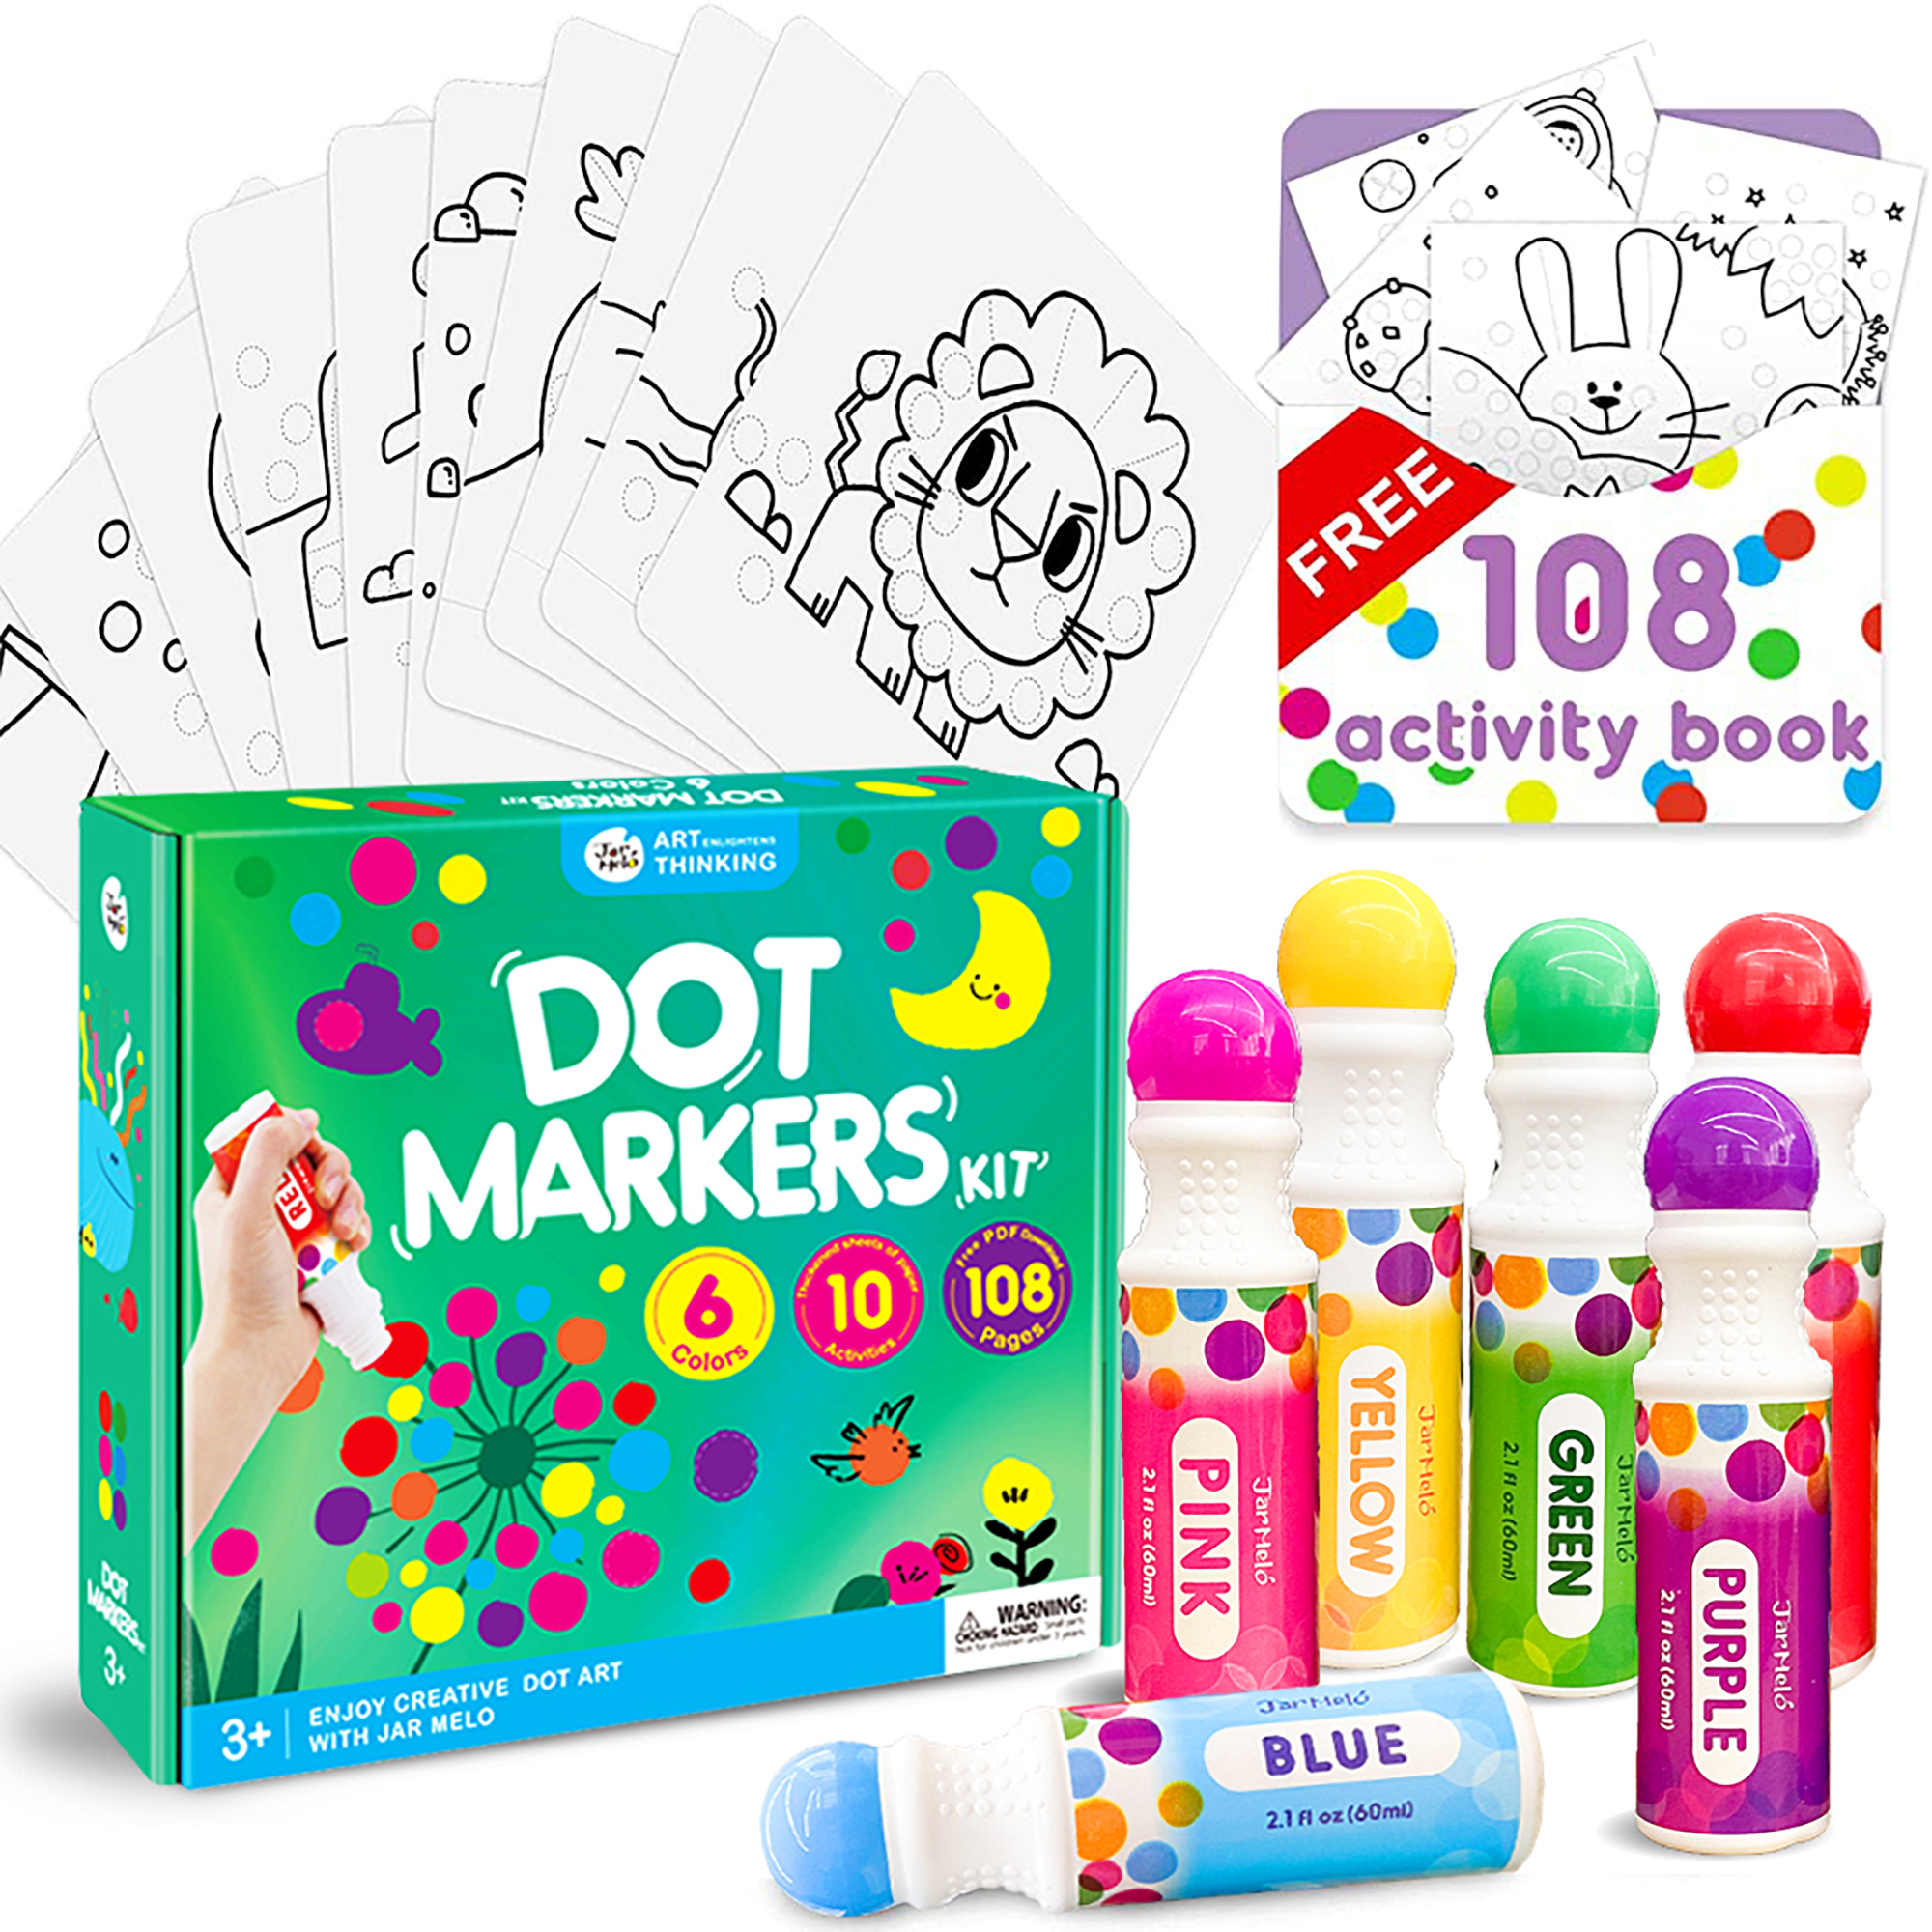 Dauber Or Babber Sex Video - Washable Dot Markers Kit, 6 Colors Dot Paint Markers 2.1 Fl.oz, Dot Art  Marker, Non-toxic, 108 Free Pdf Activity Book & 10 Physical Sheets Daubers  Marker For Toddler & Preschoolers | Free